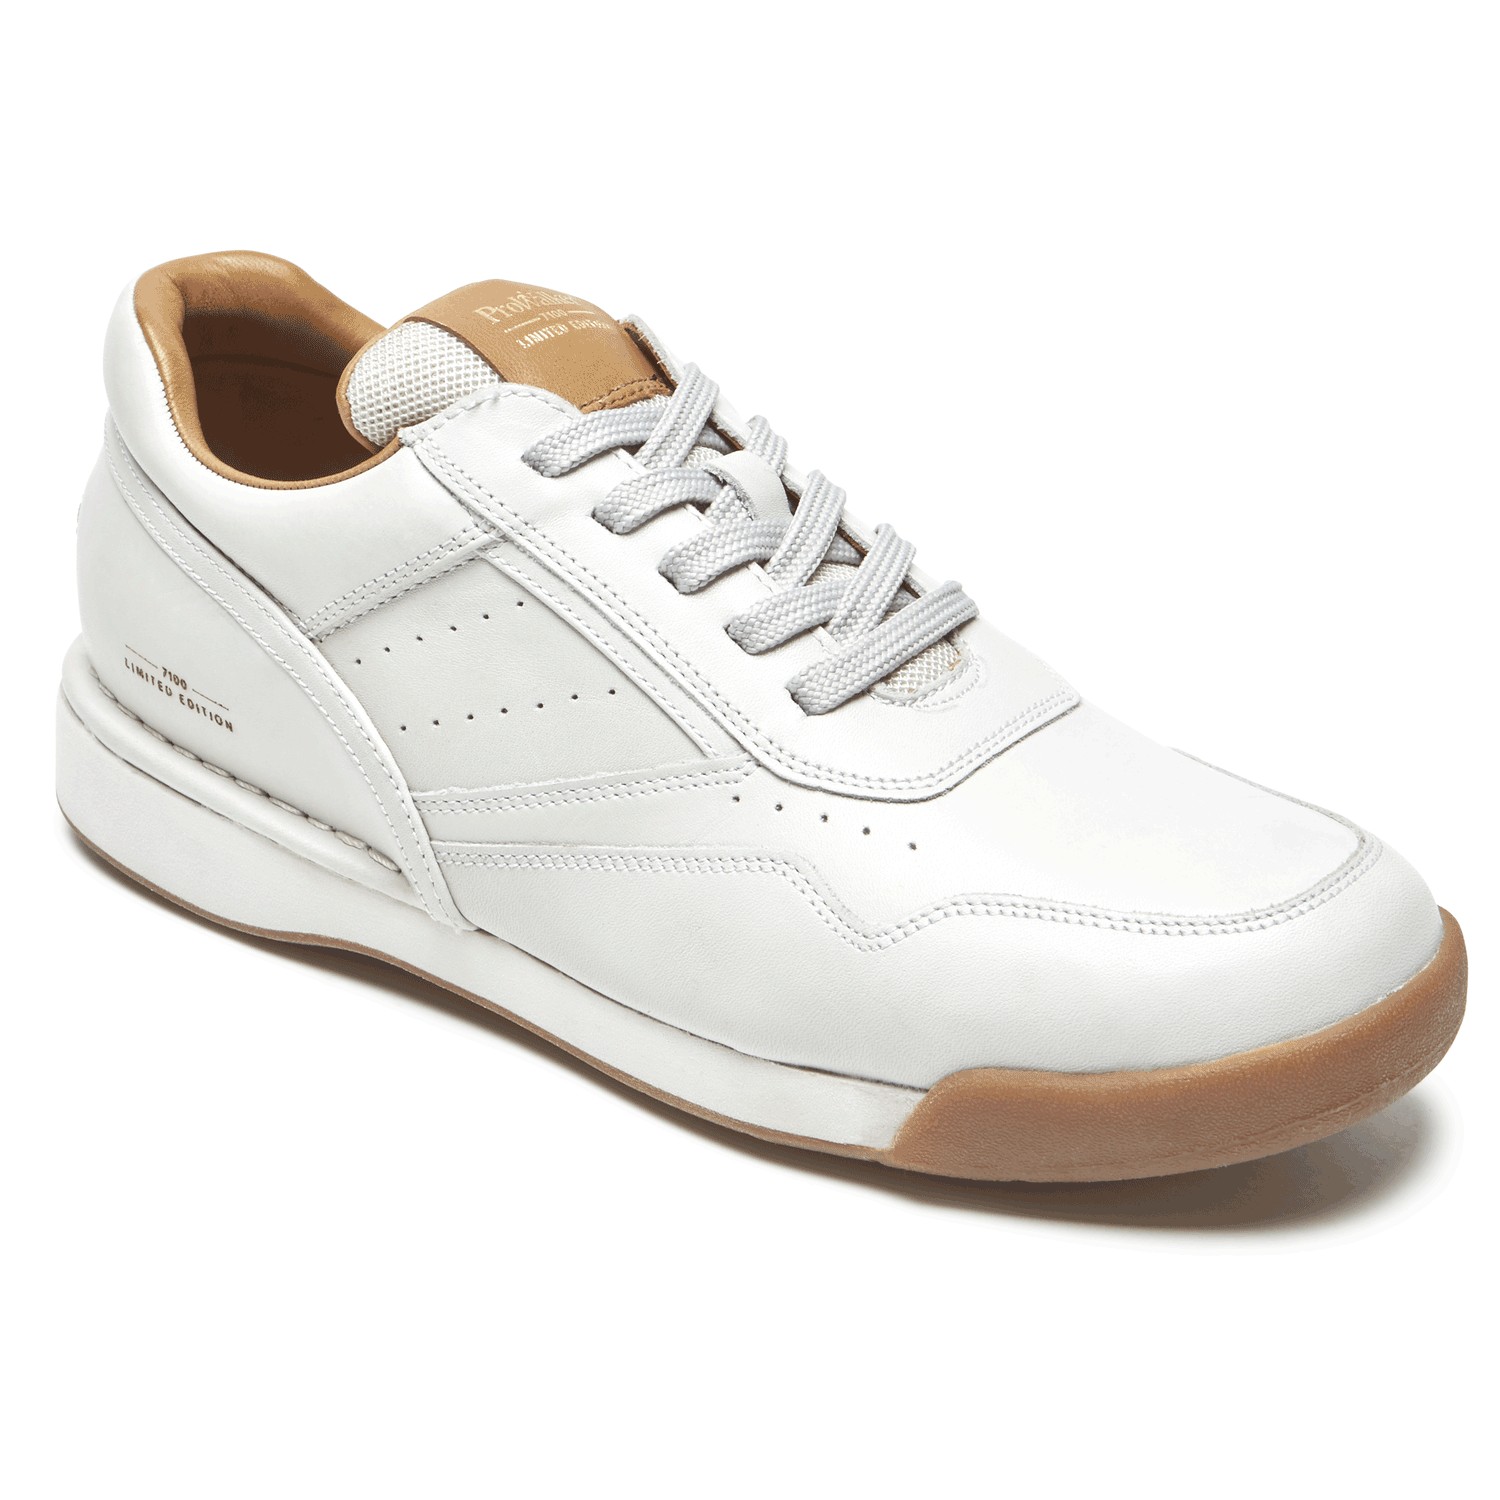 rockport shoes white